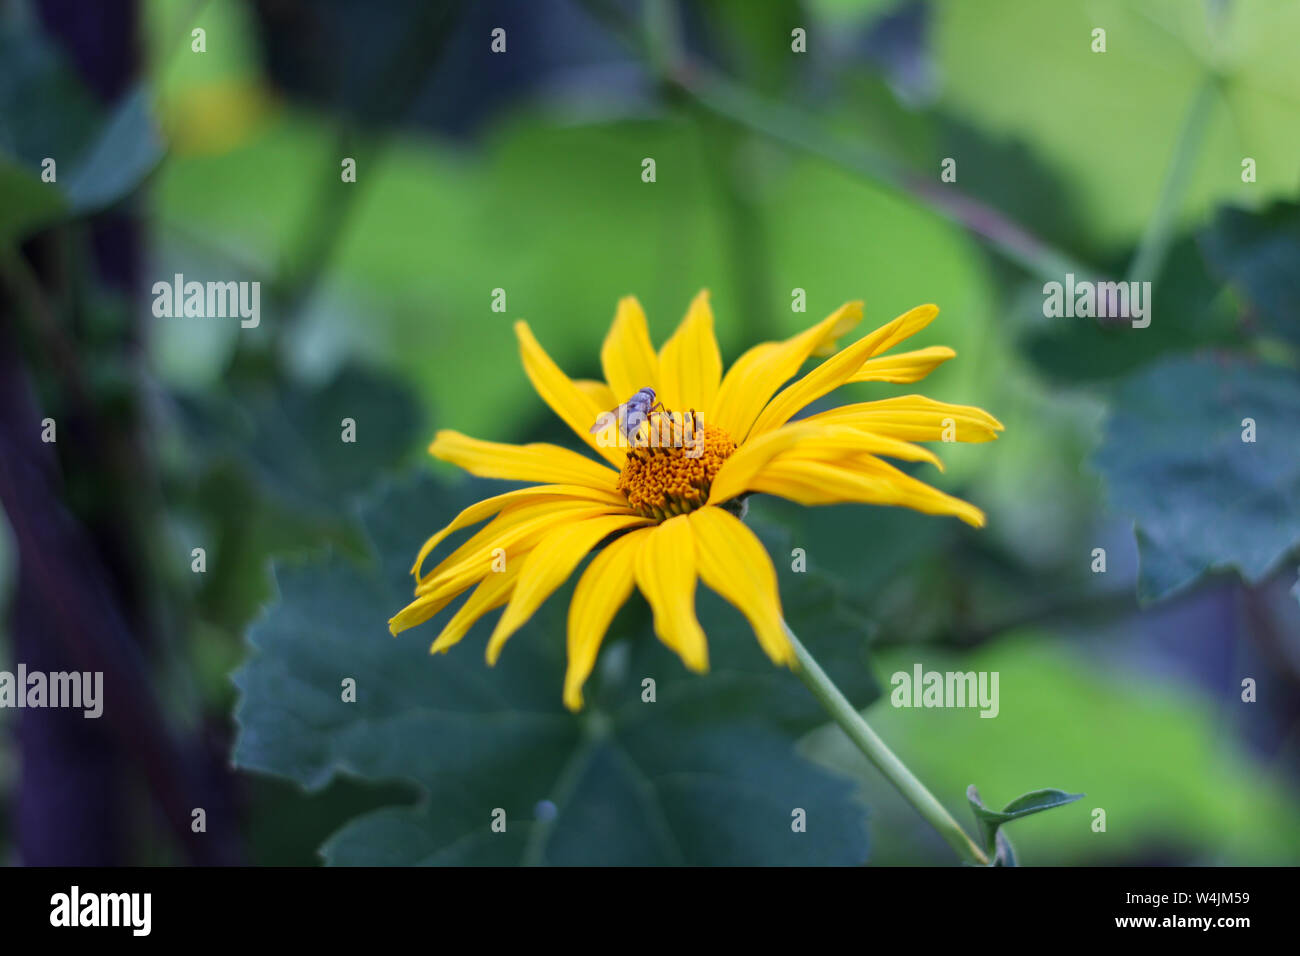 yellow flowers like daisies with insect on a green blurred background. Close up Doronicum flowering plants Stock Photo